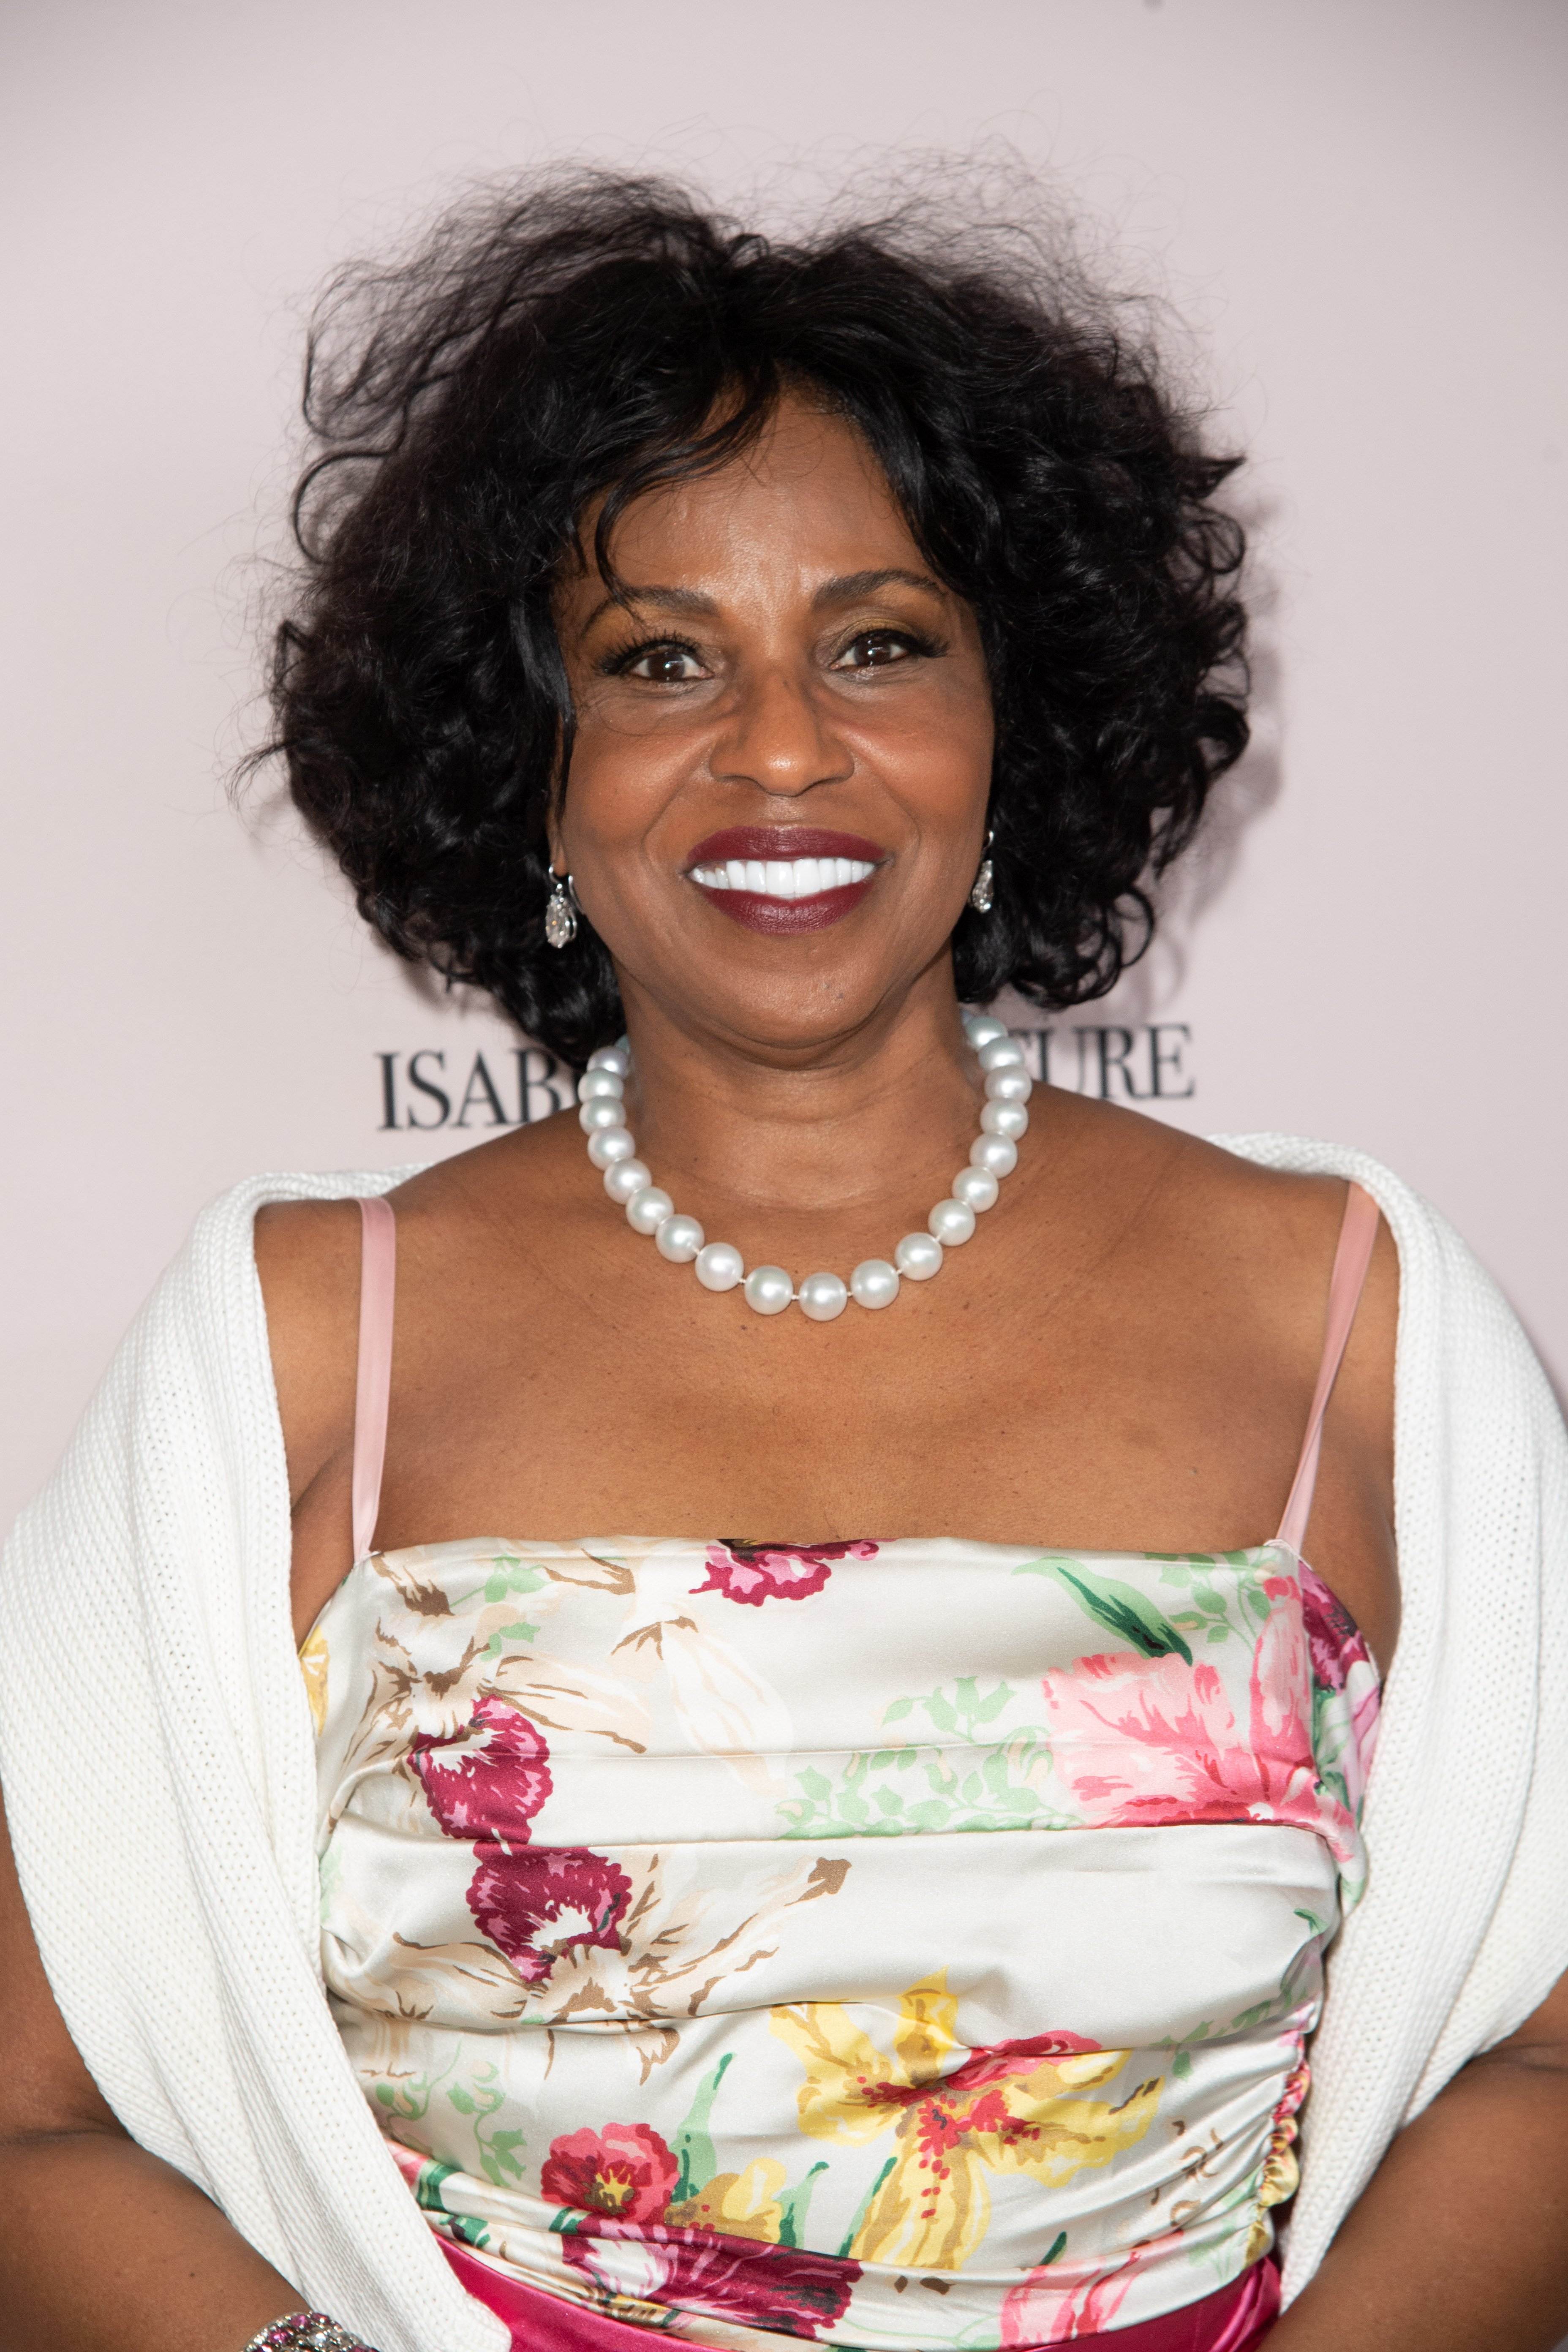 Pauletta Washington at the Ladylike Foundation's 2018 Annual Women Of Excellence Scholarship Luncheon at The Beverly Hilton Hotel on June 2, 2018 in Beverly Hills, California. | Source: Getty Images